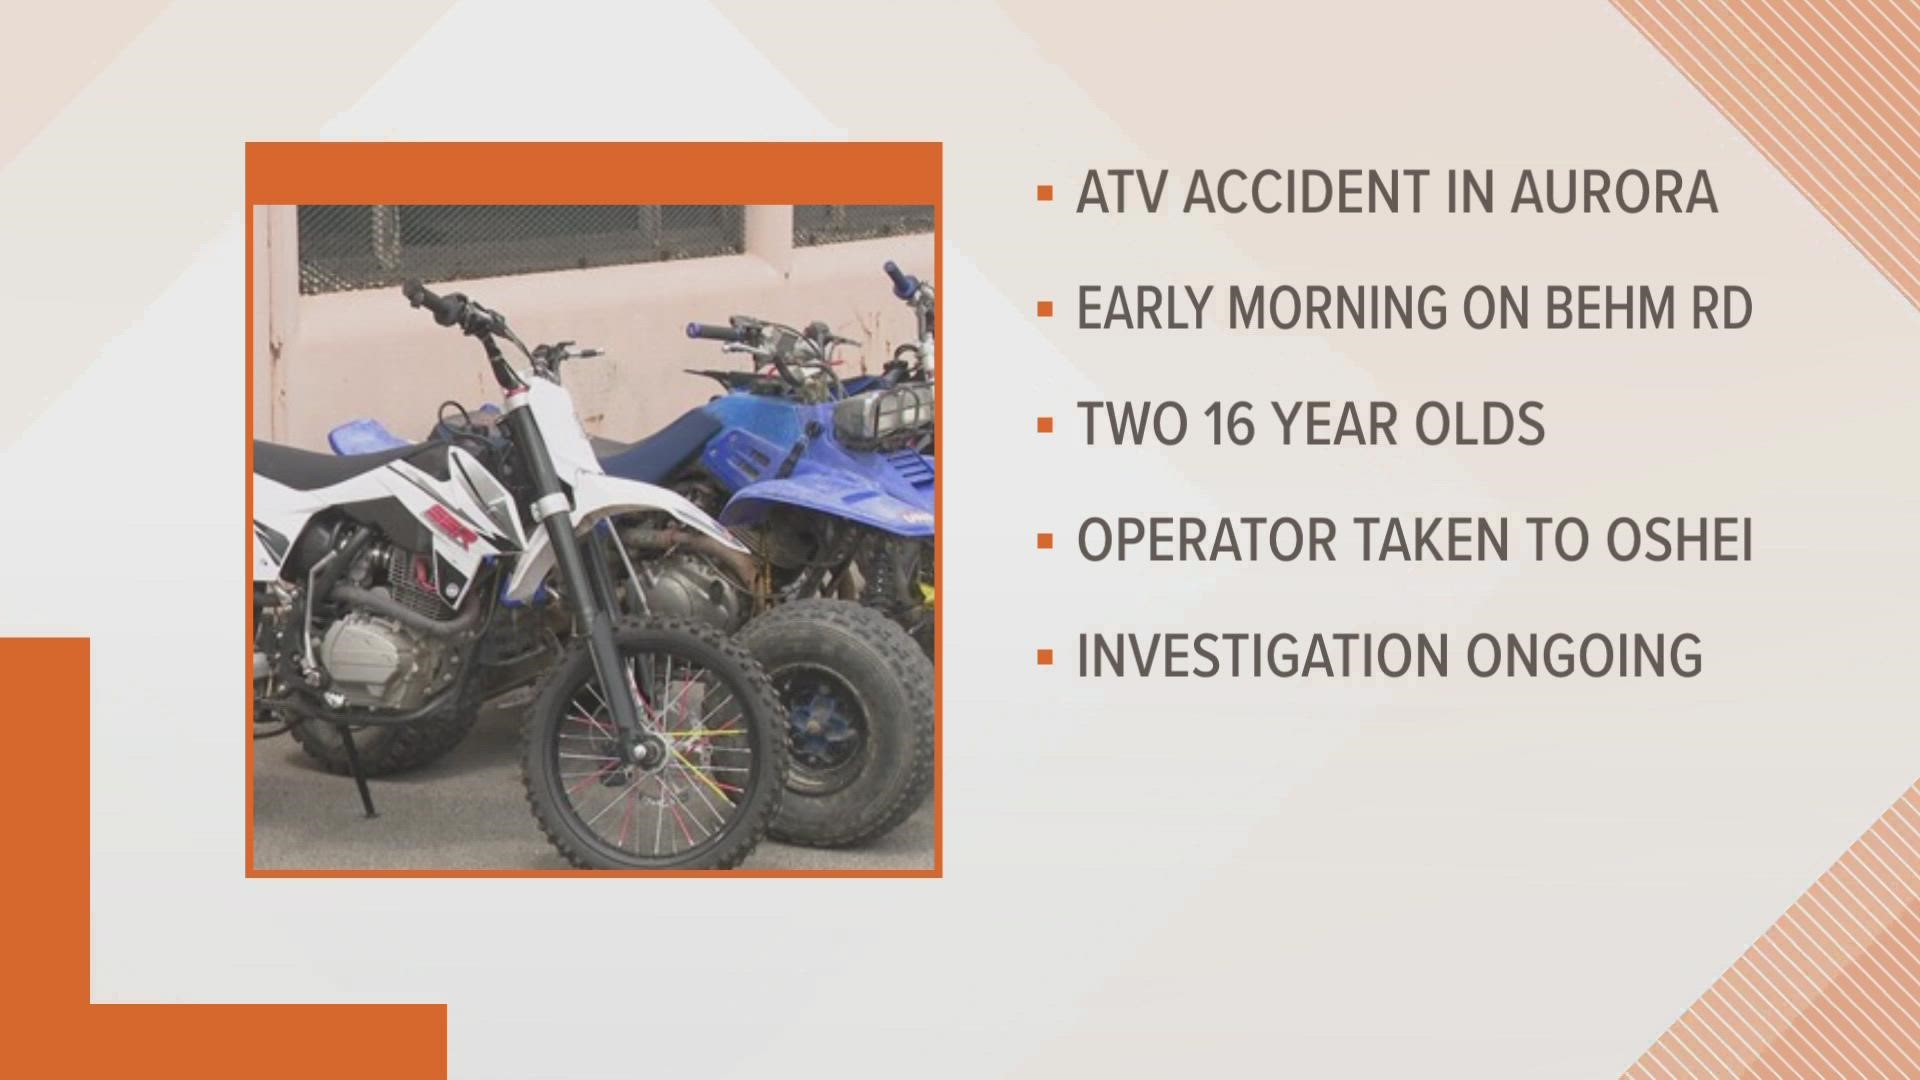 THE 16-YEAR-OLD OPERATOR WAS FOUND UNCONSCIOUS AND WAS taken to OISHEI CHILDREN'S HOSPITAL.